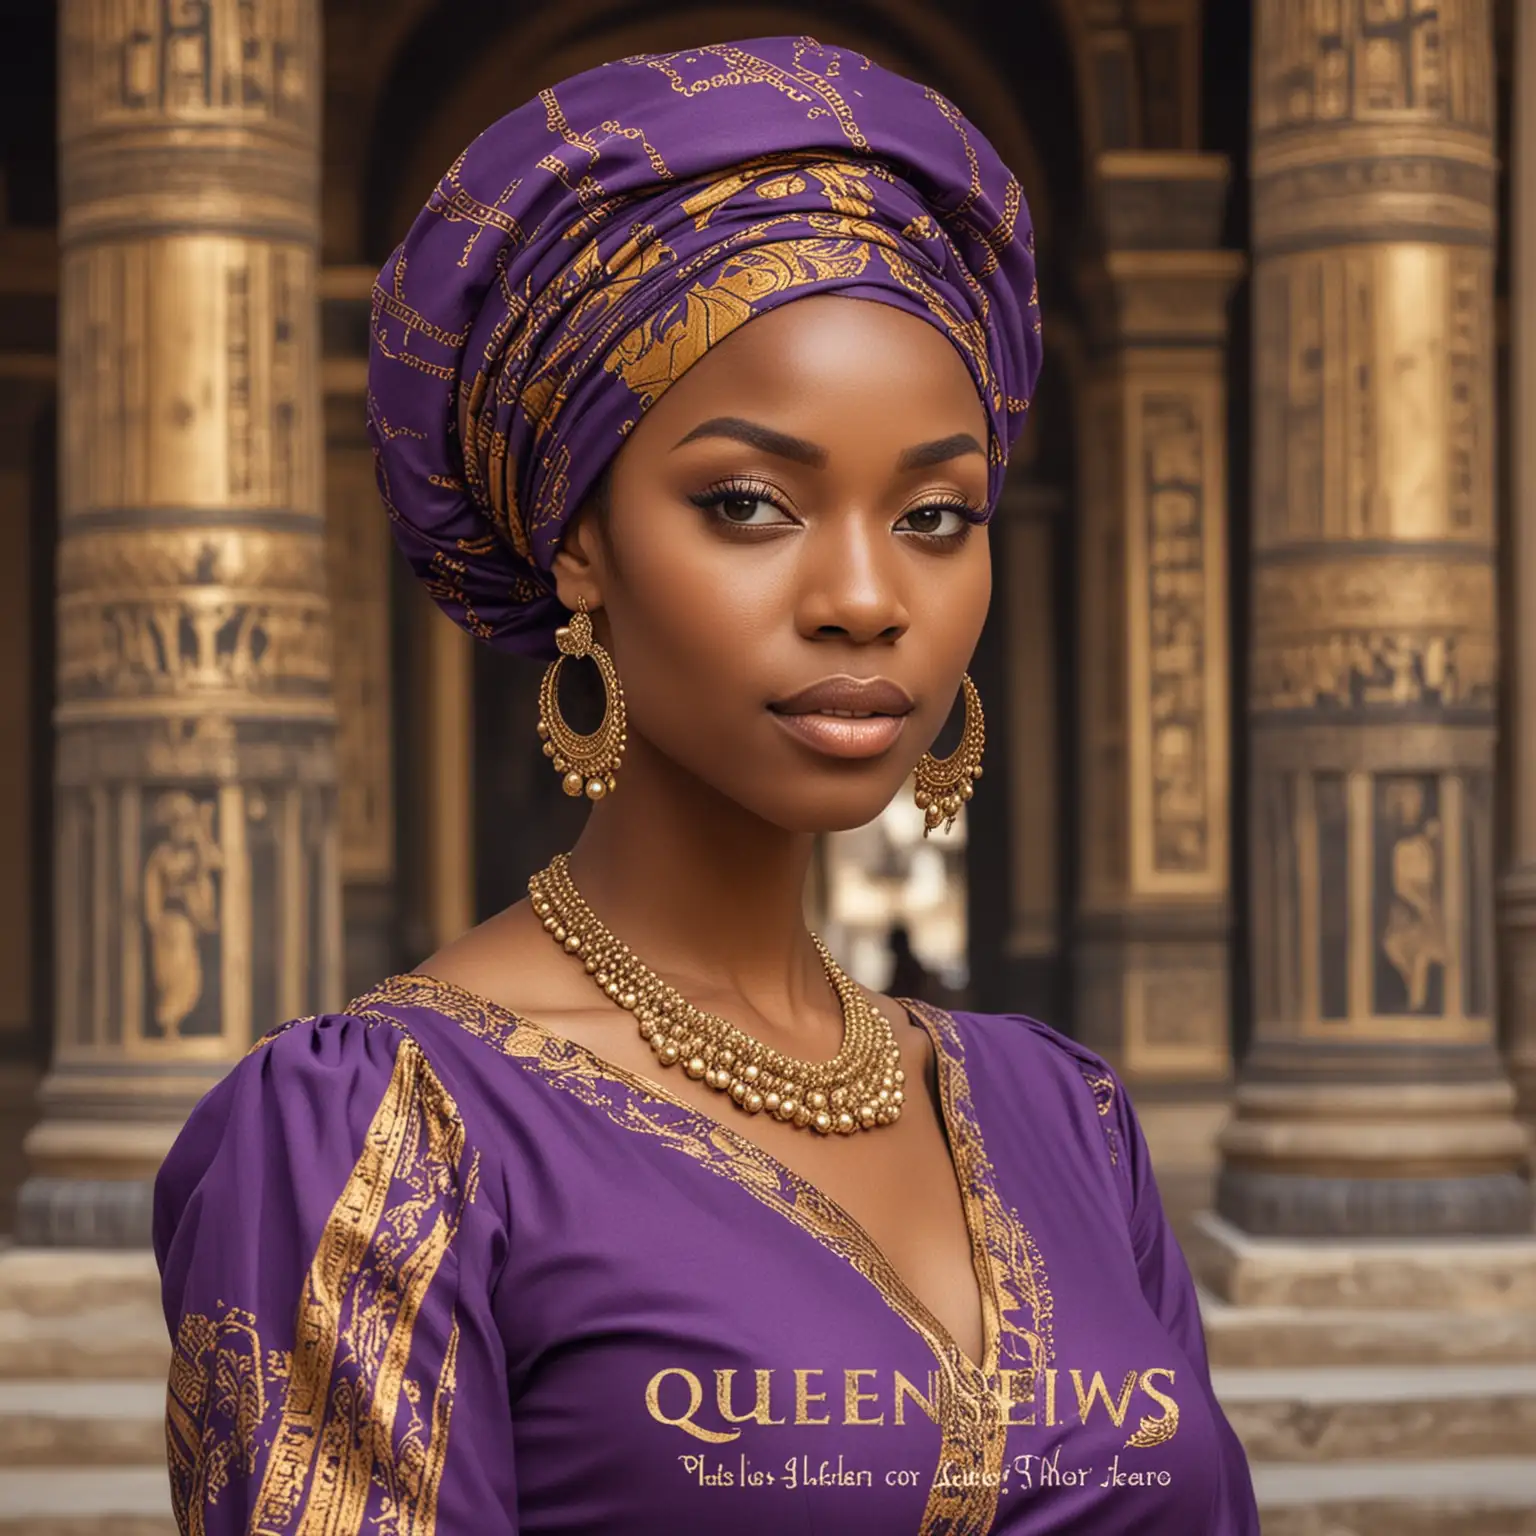 Graceful Black Woman in Purple and Gold Dress with Head Wrap at Temple